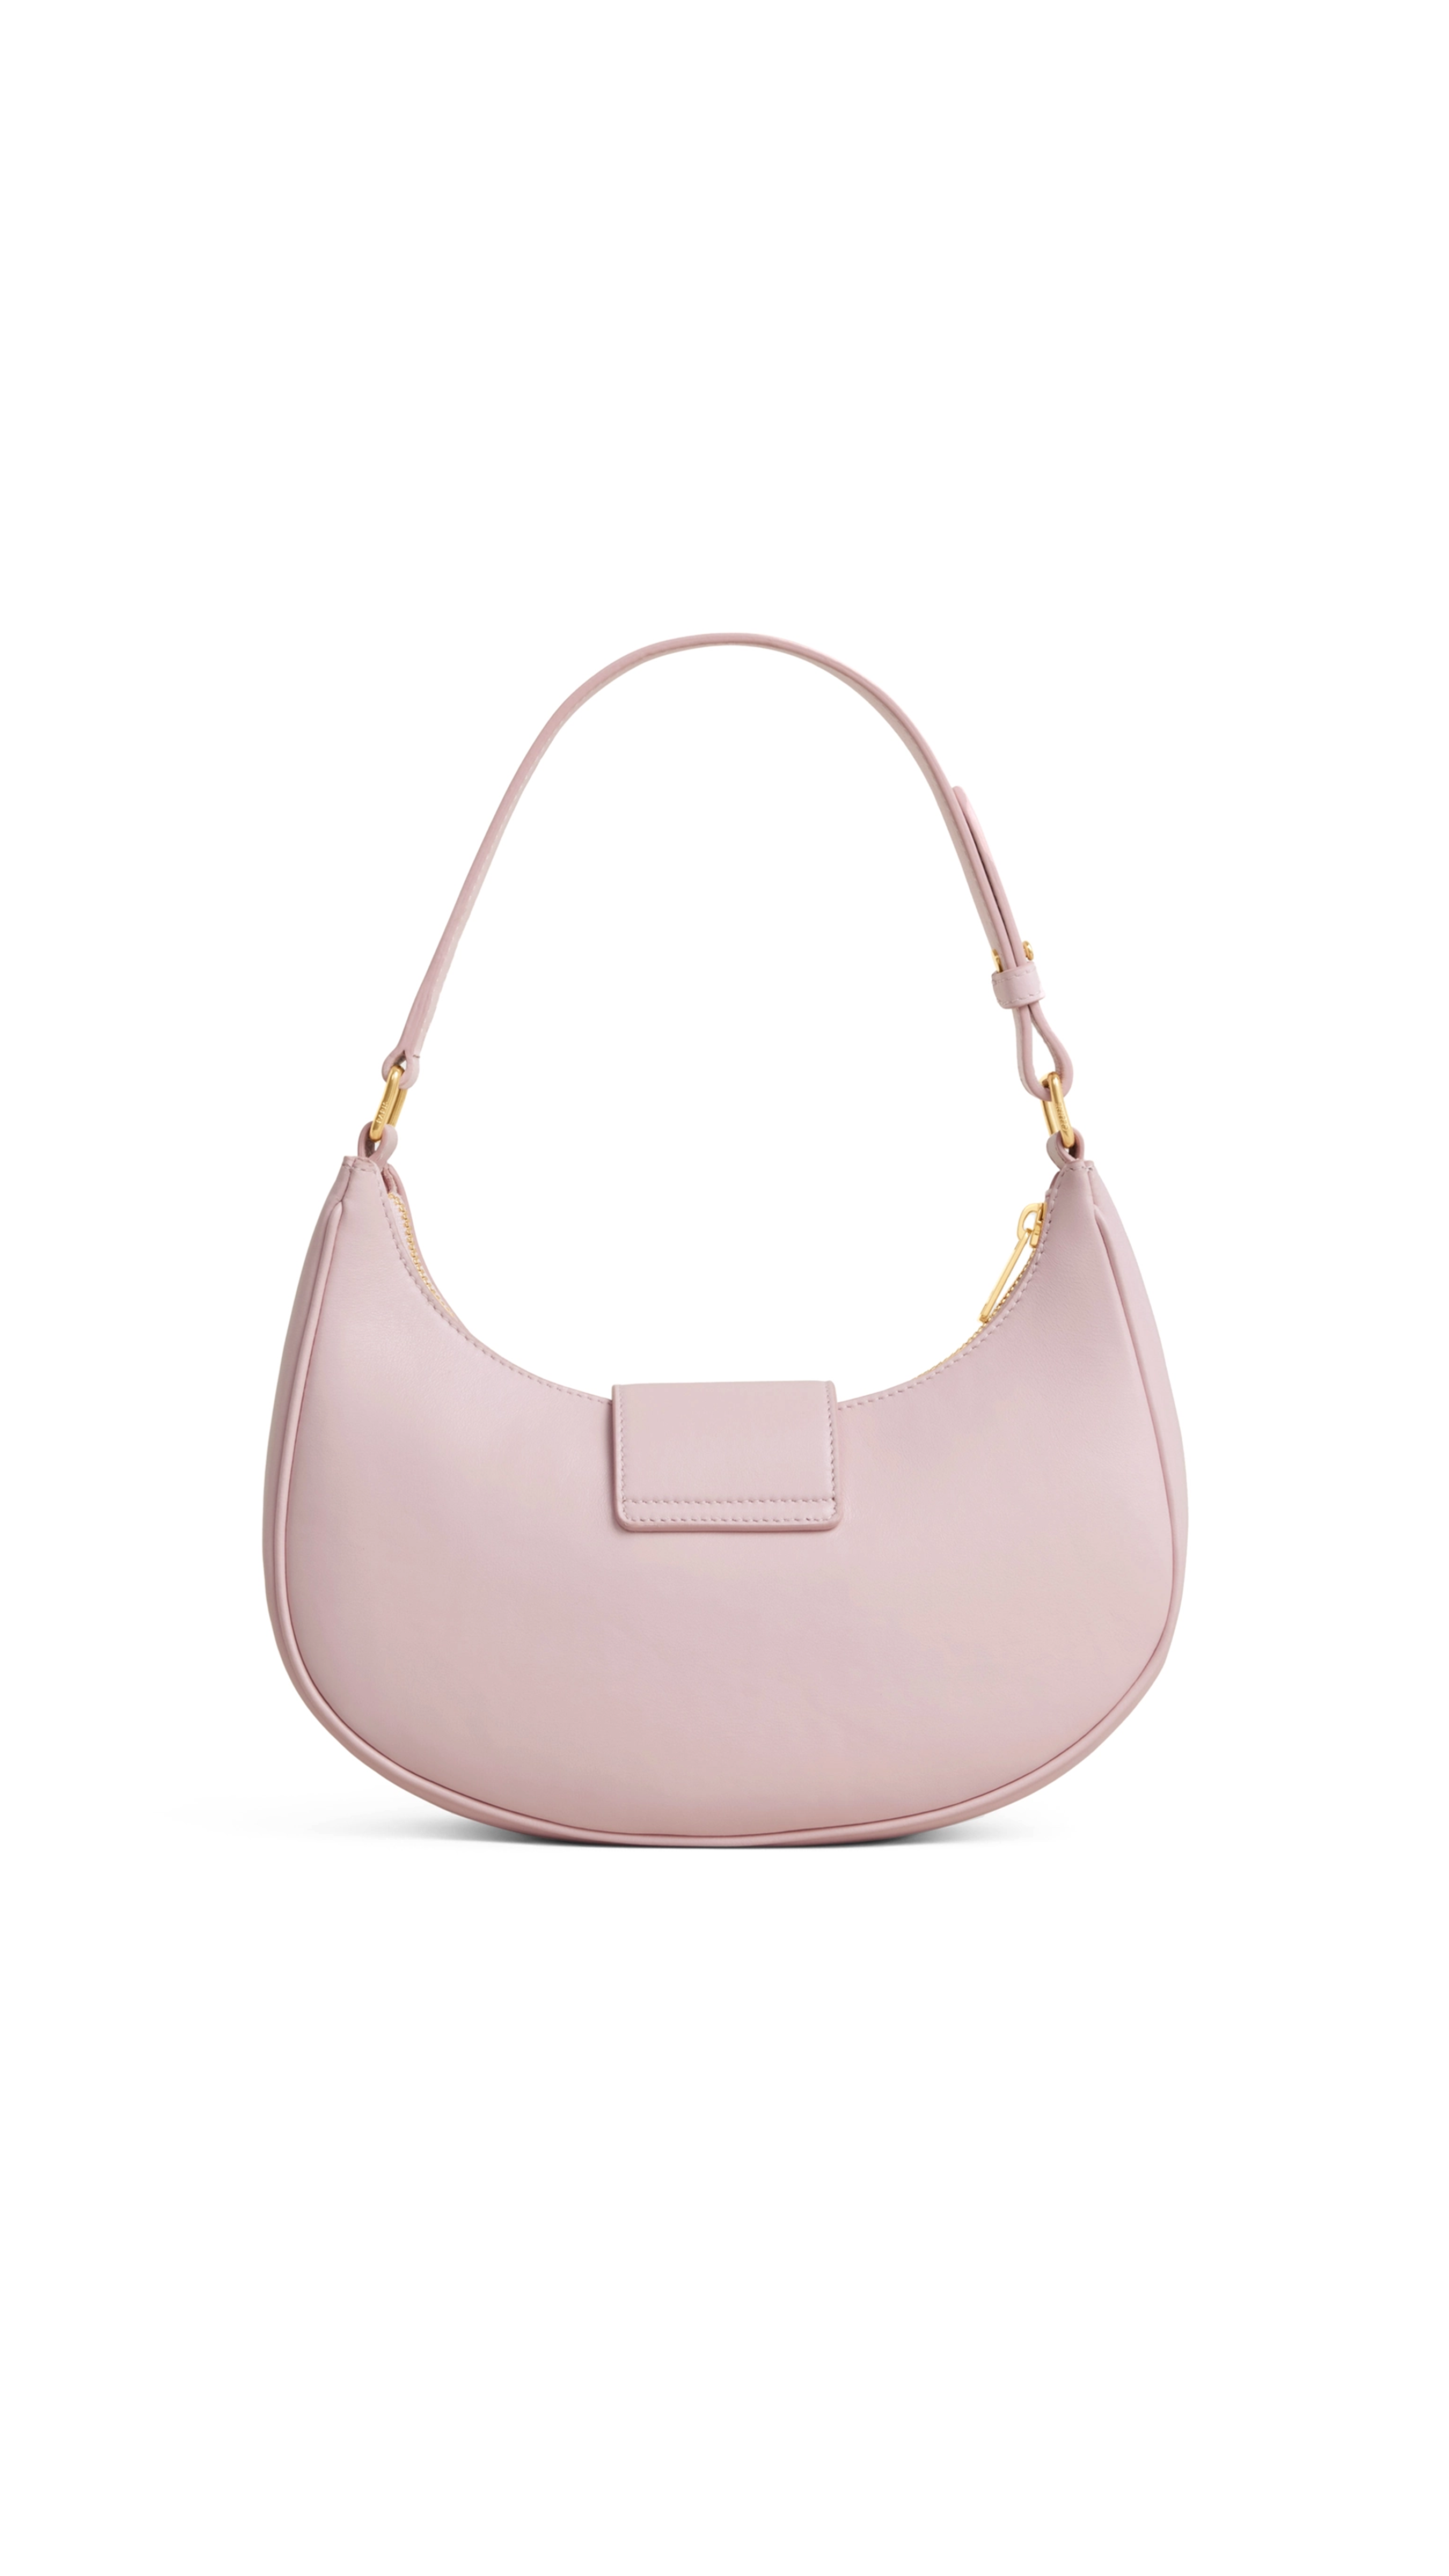 Ava Triomphe Soft Bag in Smooth Calfskin - Pastel Pink